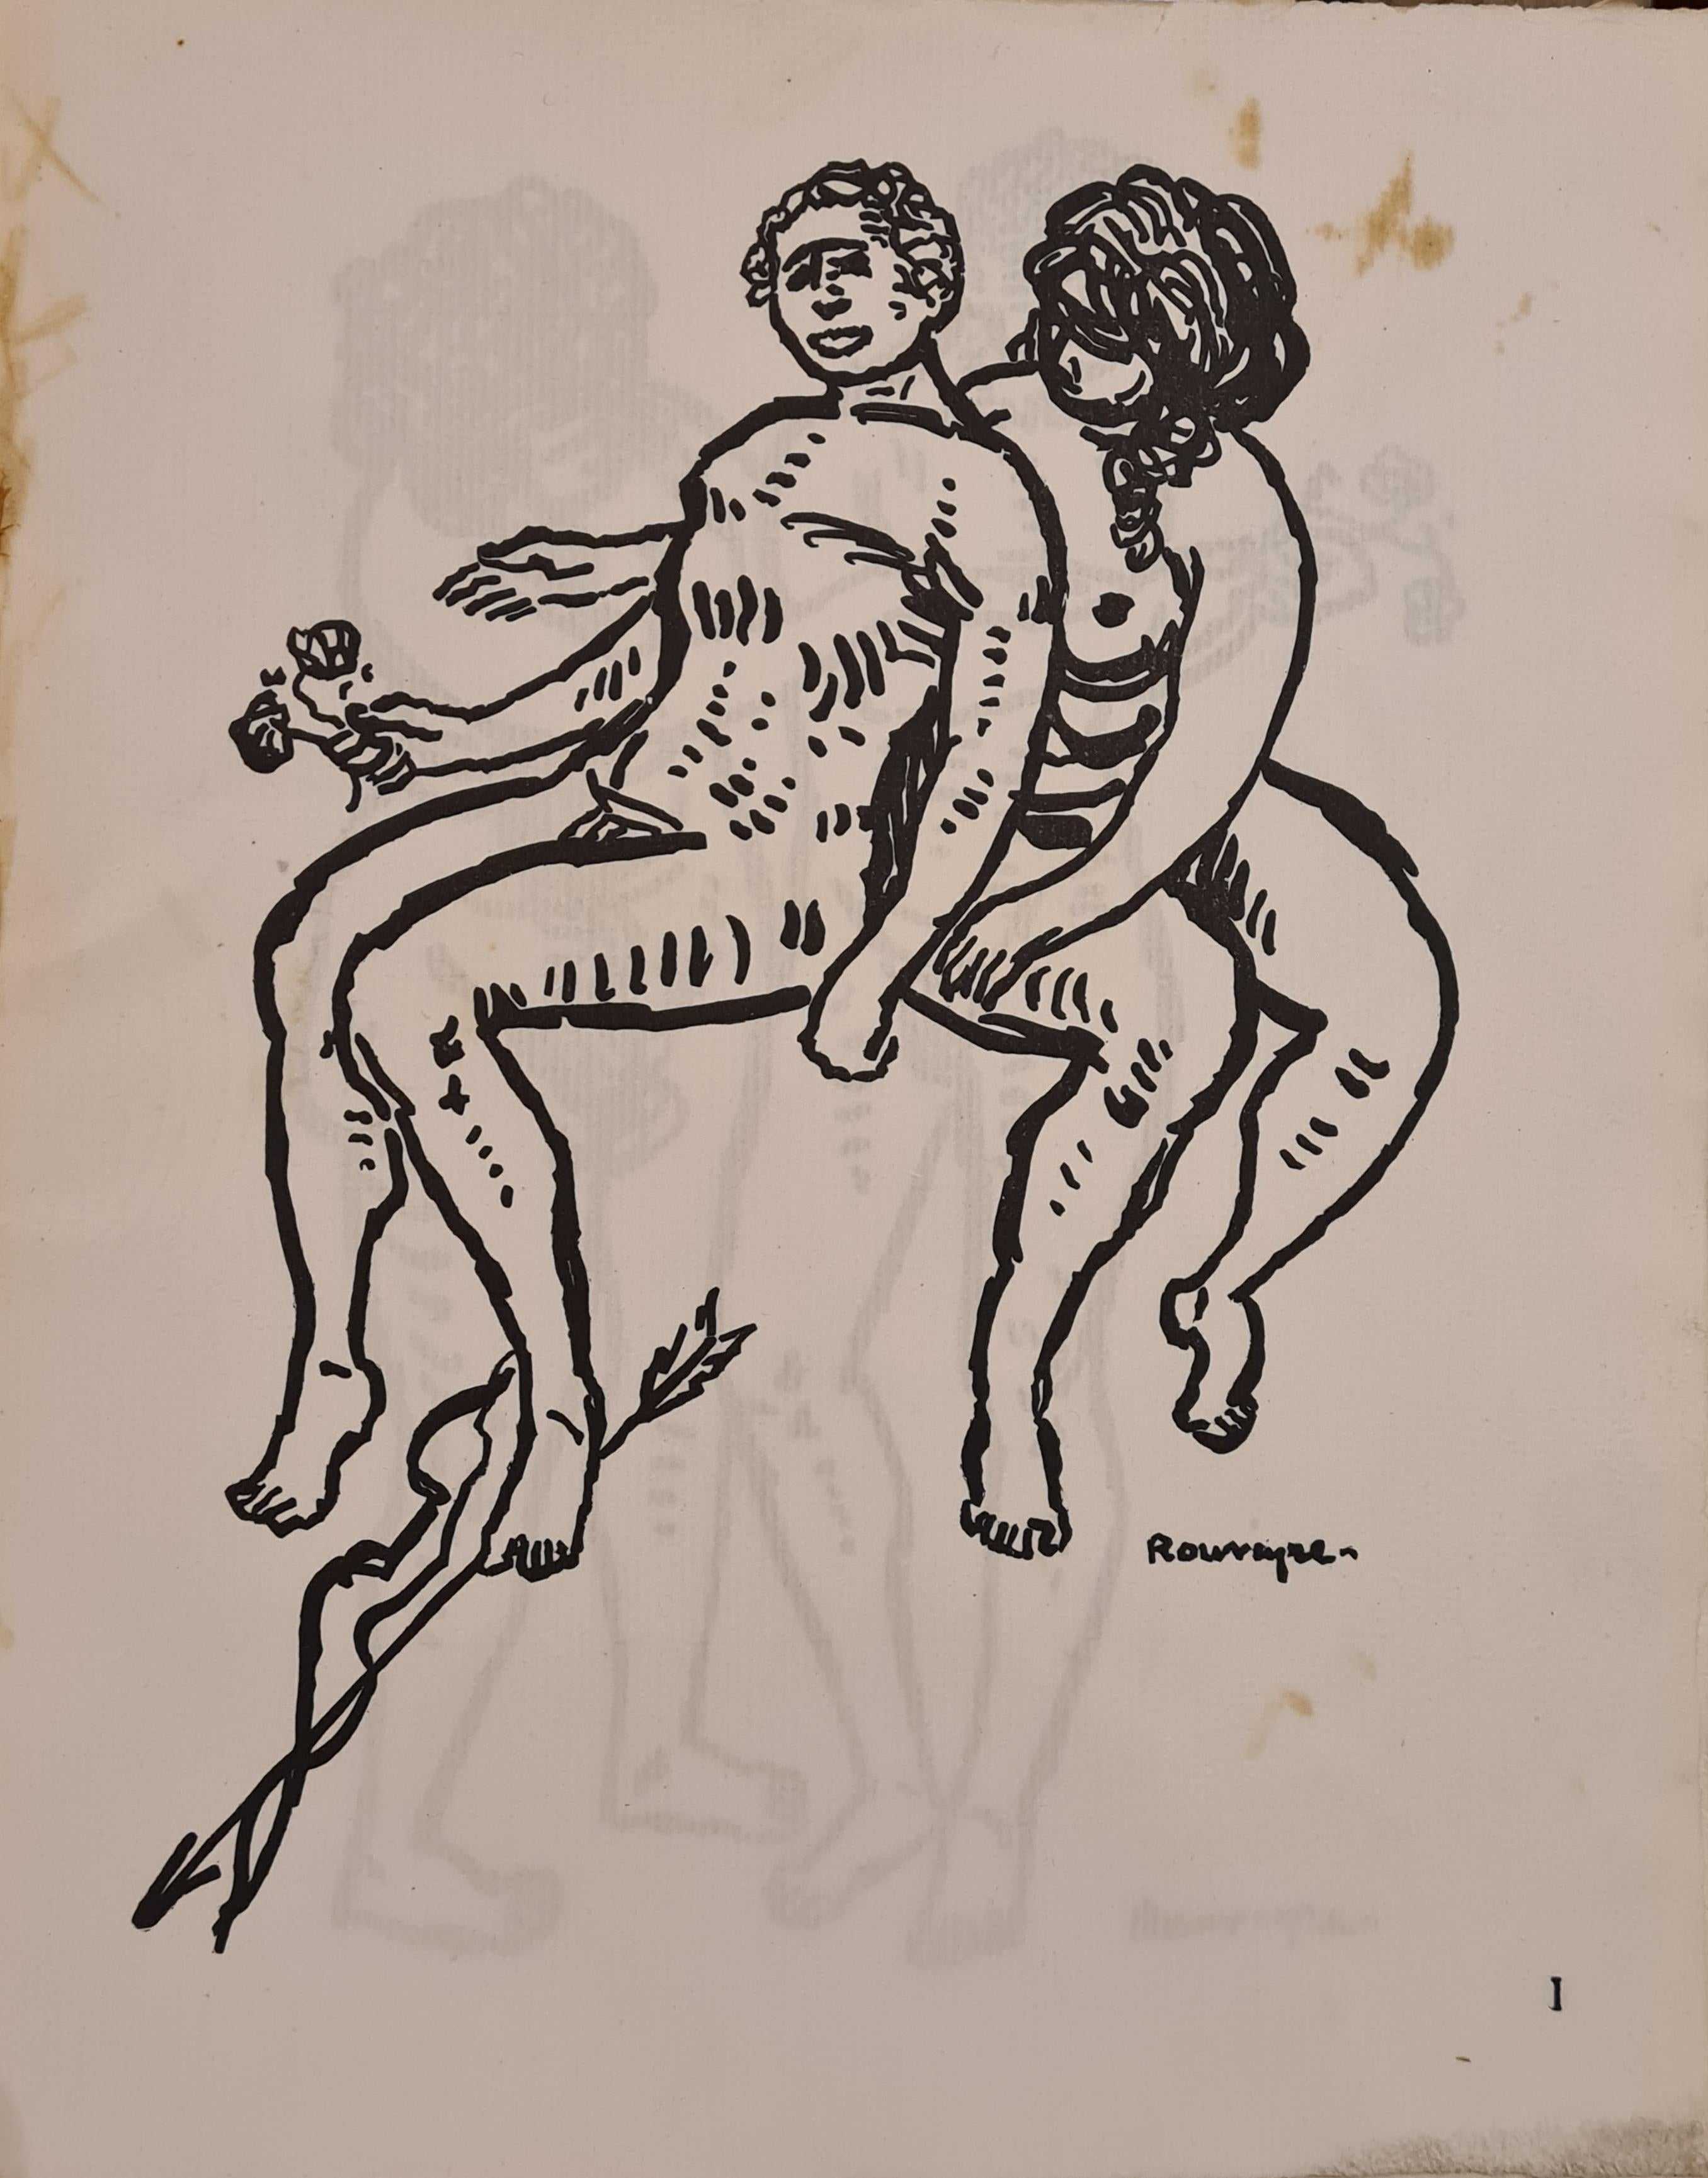 Mort de l'Amour, Series of 8 Erotic Limited-Edition Wood Engravings. - Print by André Rouveyre